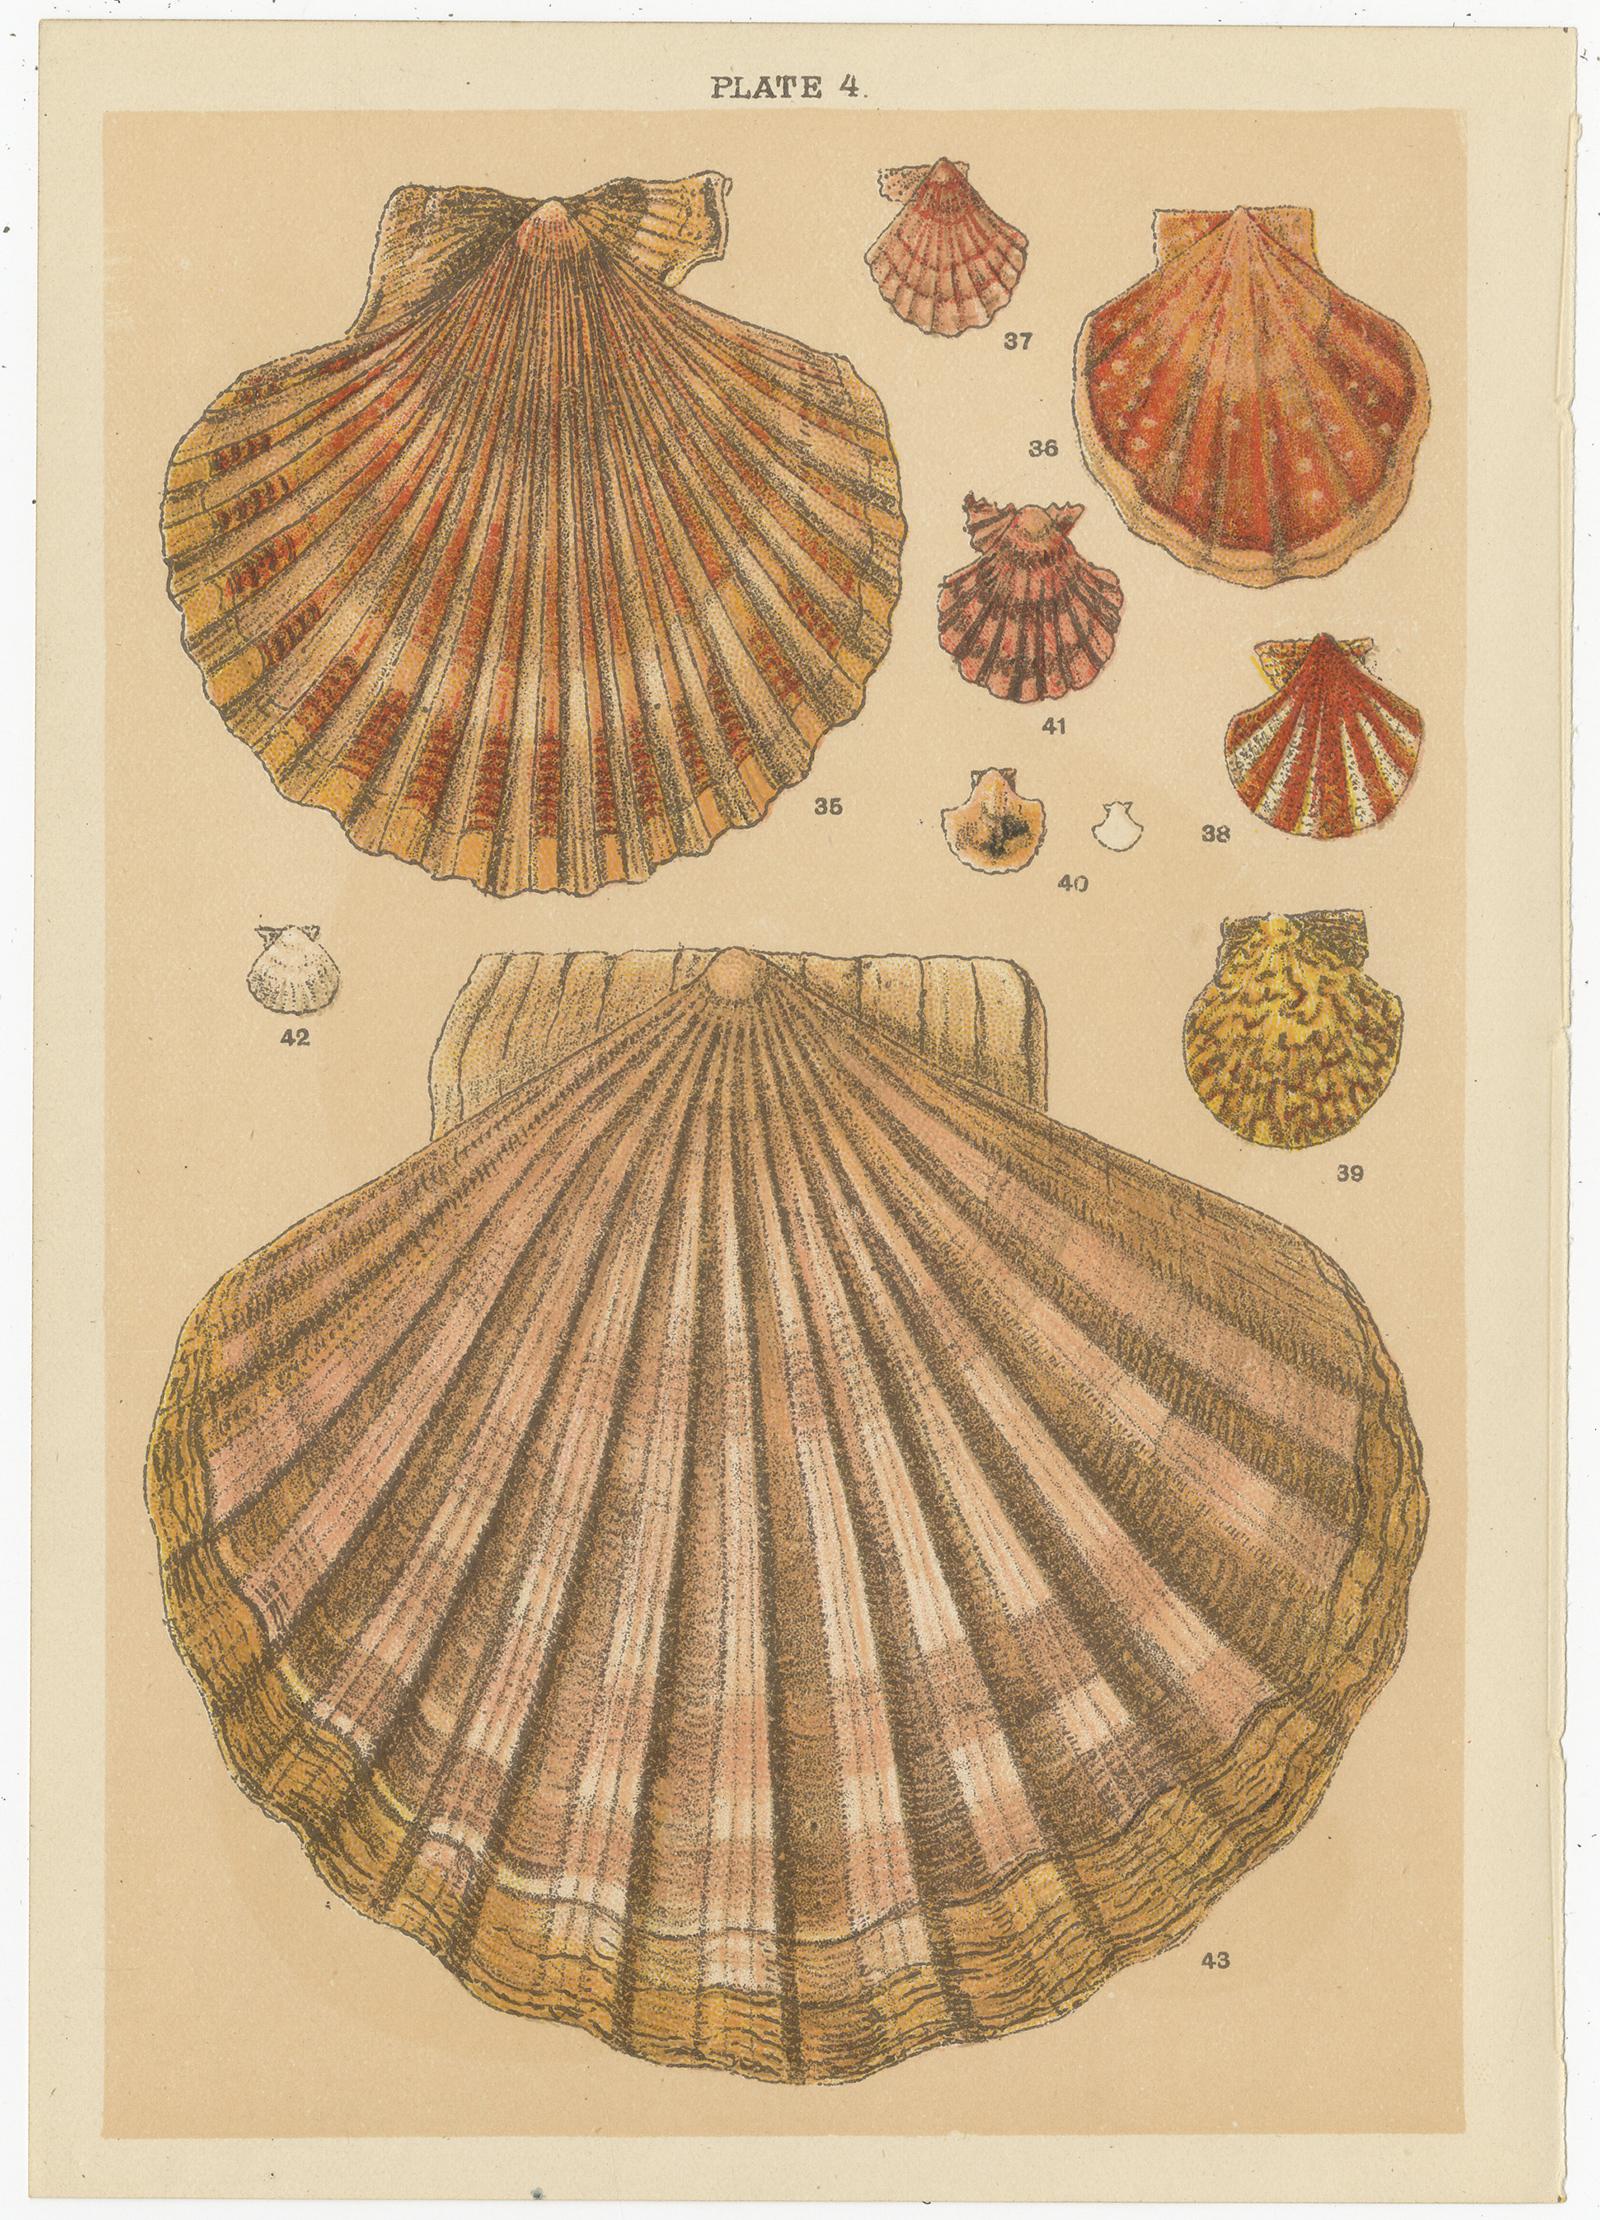 Set of 10 antique prints depicting various sea shells. These prints originate from the series 'Our Country's' by W. J. Gordon, published circa 1900.